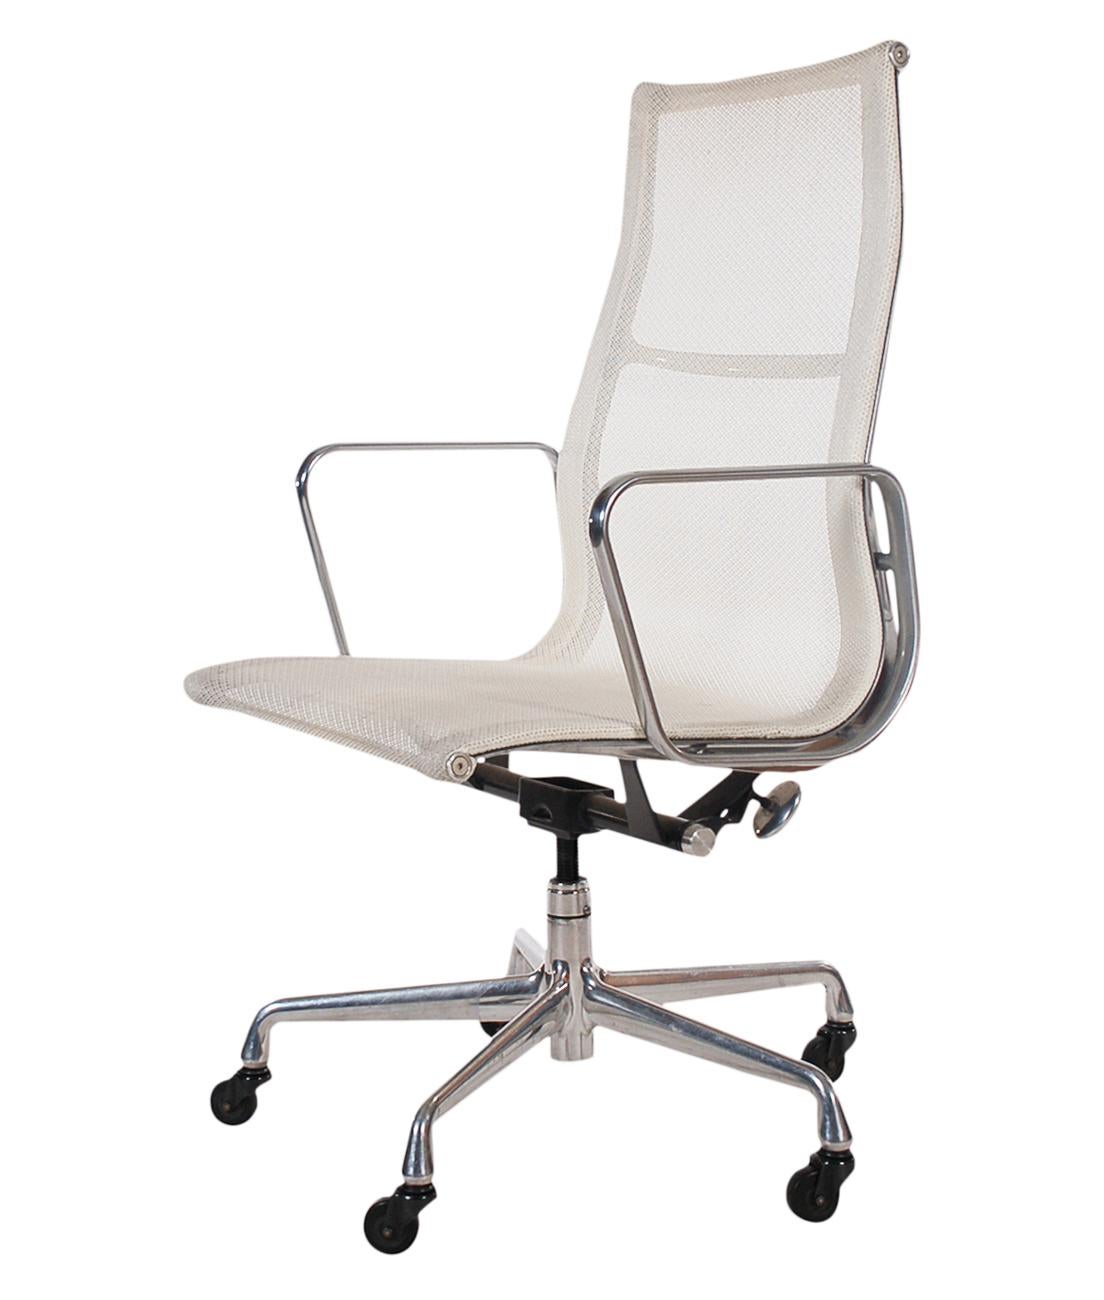 Pair of Charles Eames for Herman Miller White Conference Room Office Chairs 1